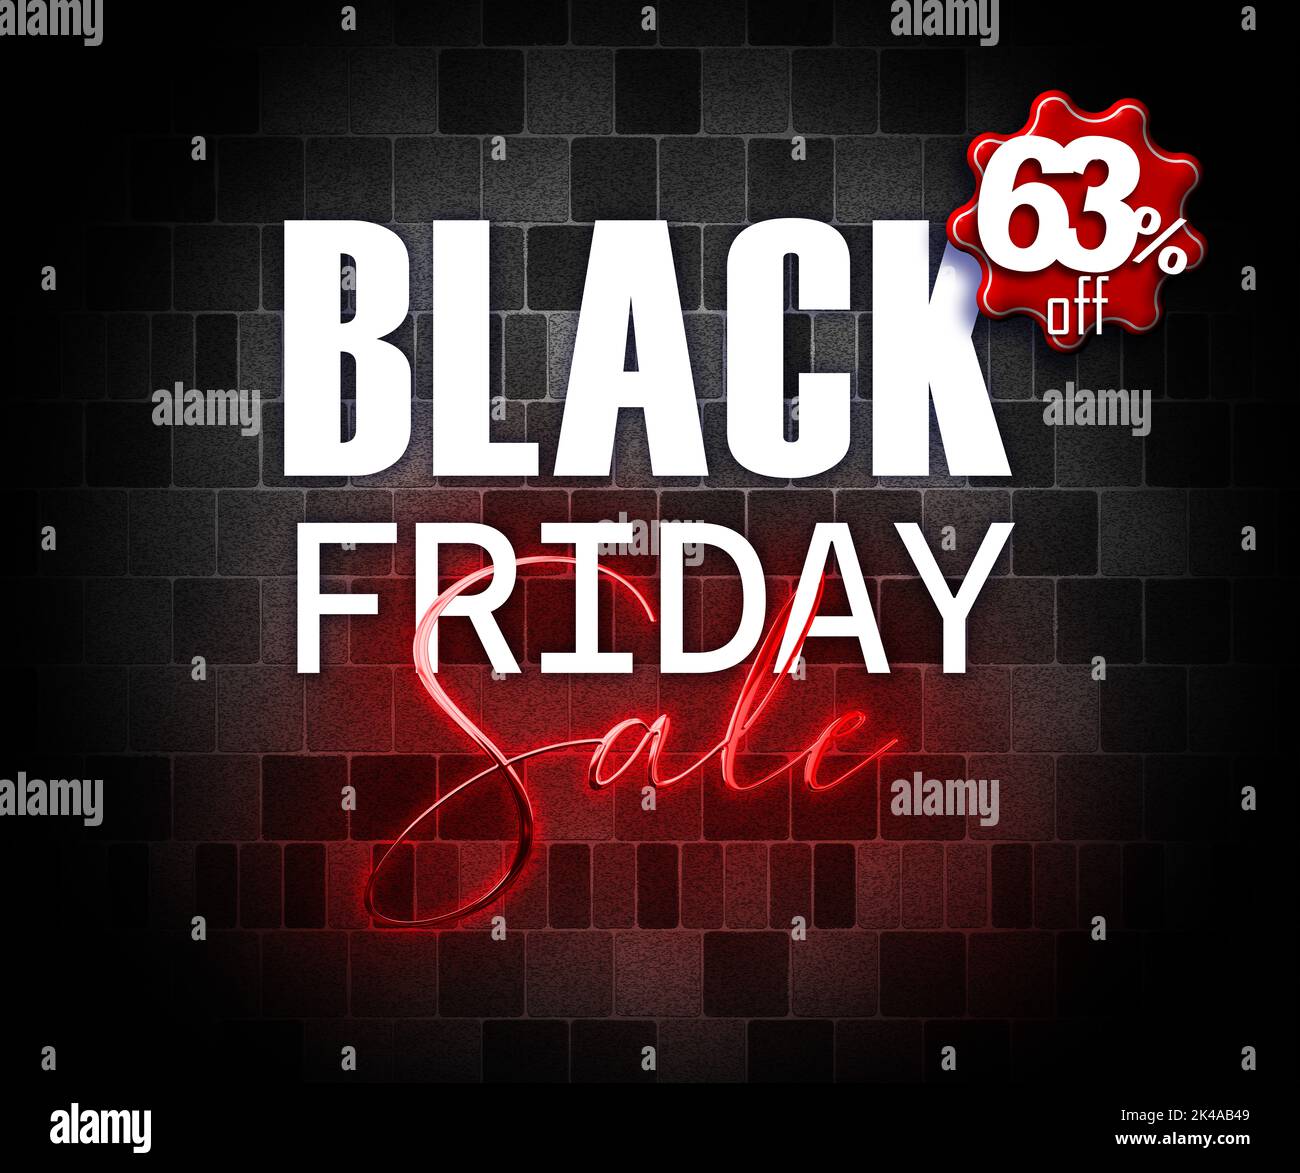 illustration with 3d elements black friday promotion banner 63 percent off sales increase Stock Photo